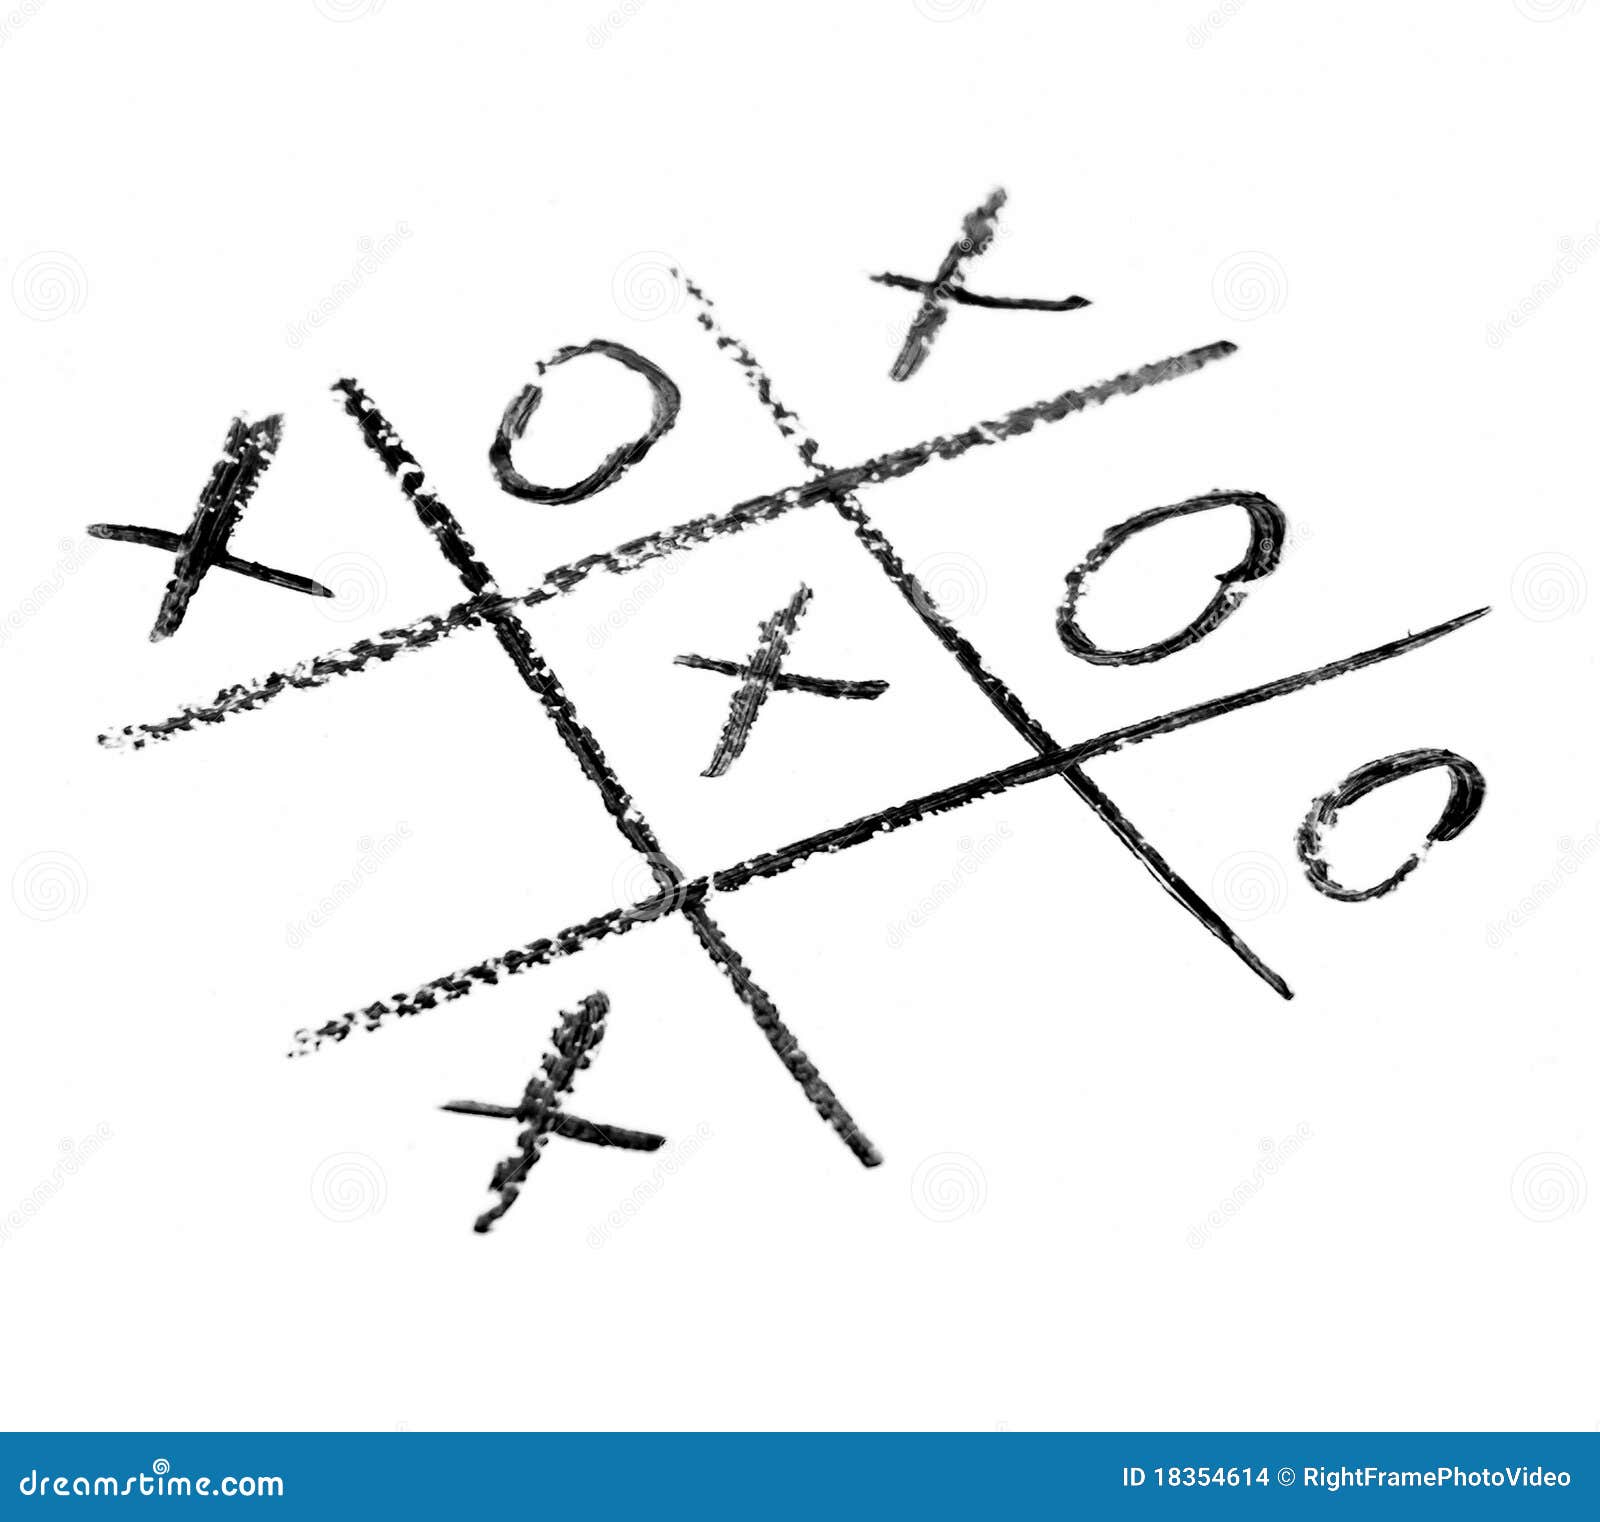 Hand Drawn Vector Tic Tac Toe Game Noughts And Crosses Doodle Sketch Stock  Illustration - Download Image Now - iStock